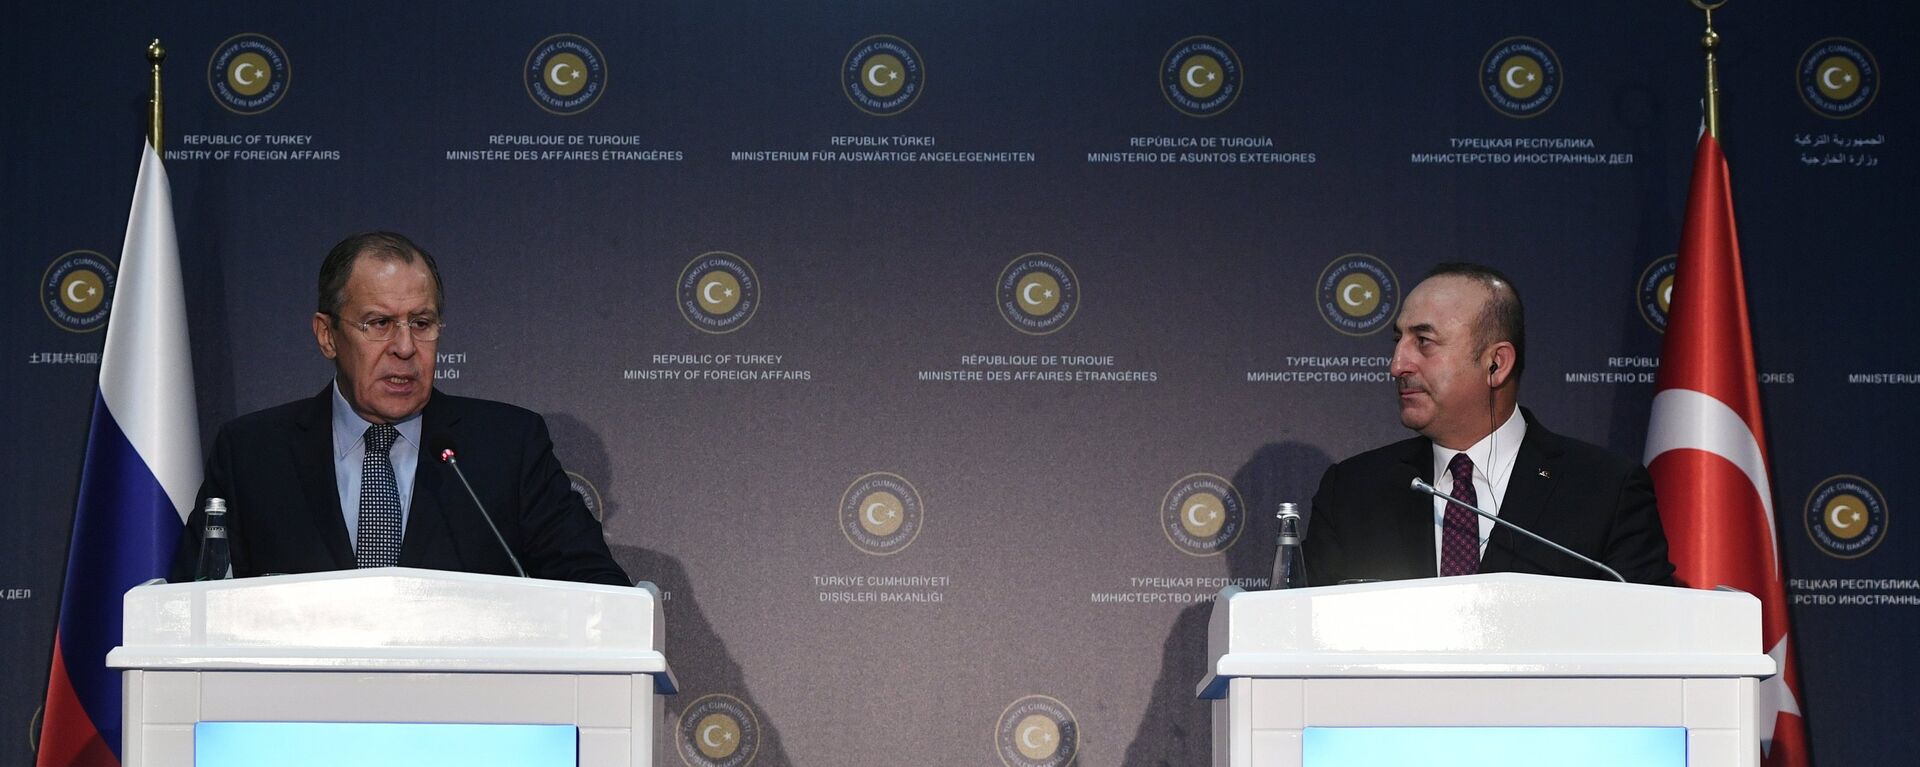 Russian Foreign Minister Sergei Lavrov, left, and Turkish Foreign Minister Mevlut Cavusoglu at a news conference following a meeting in Turkey - Sputnik International, 1920, 06.04.2023